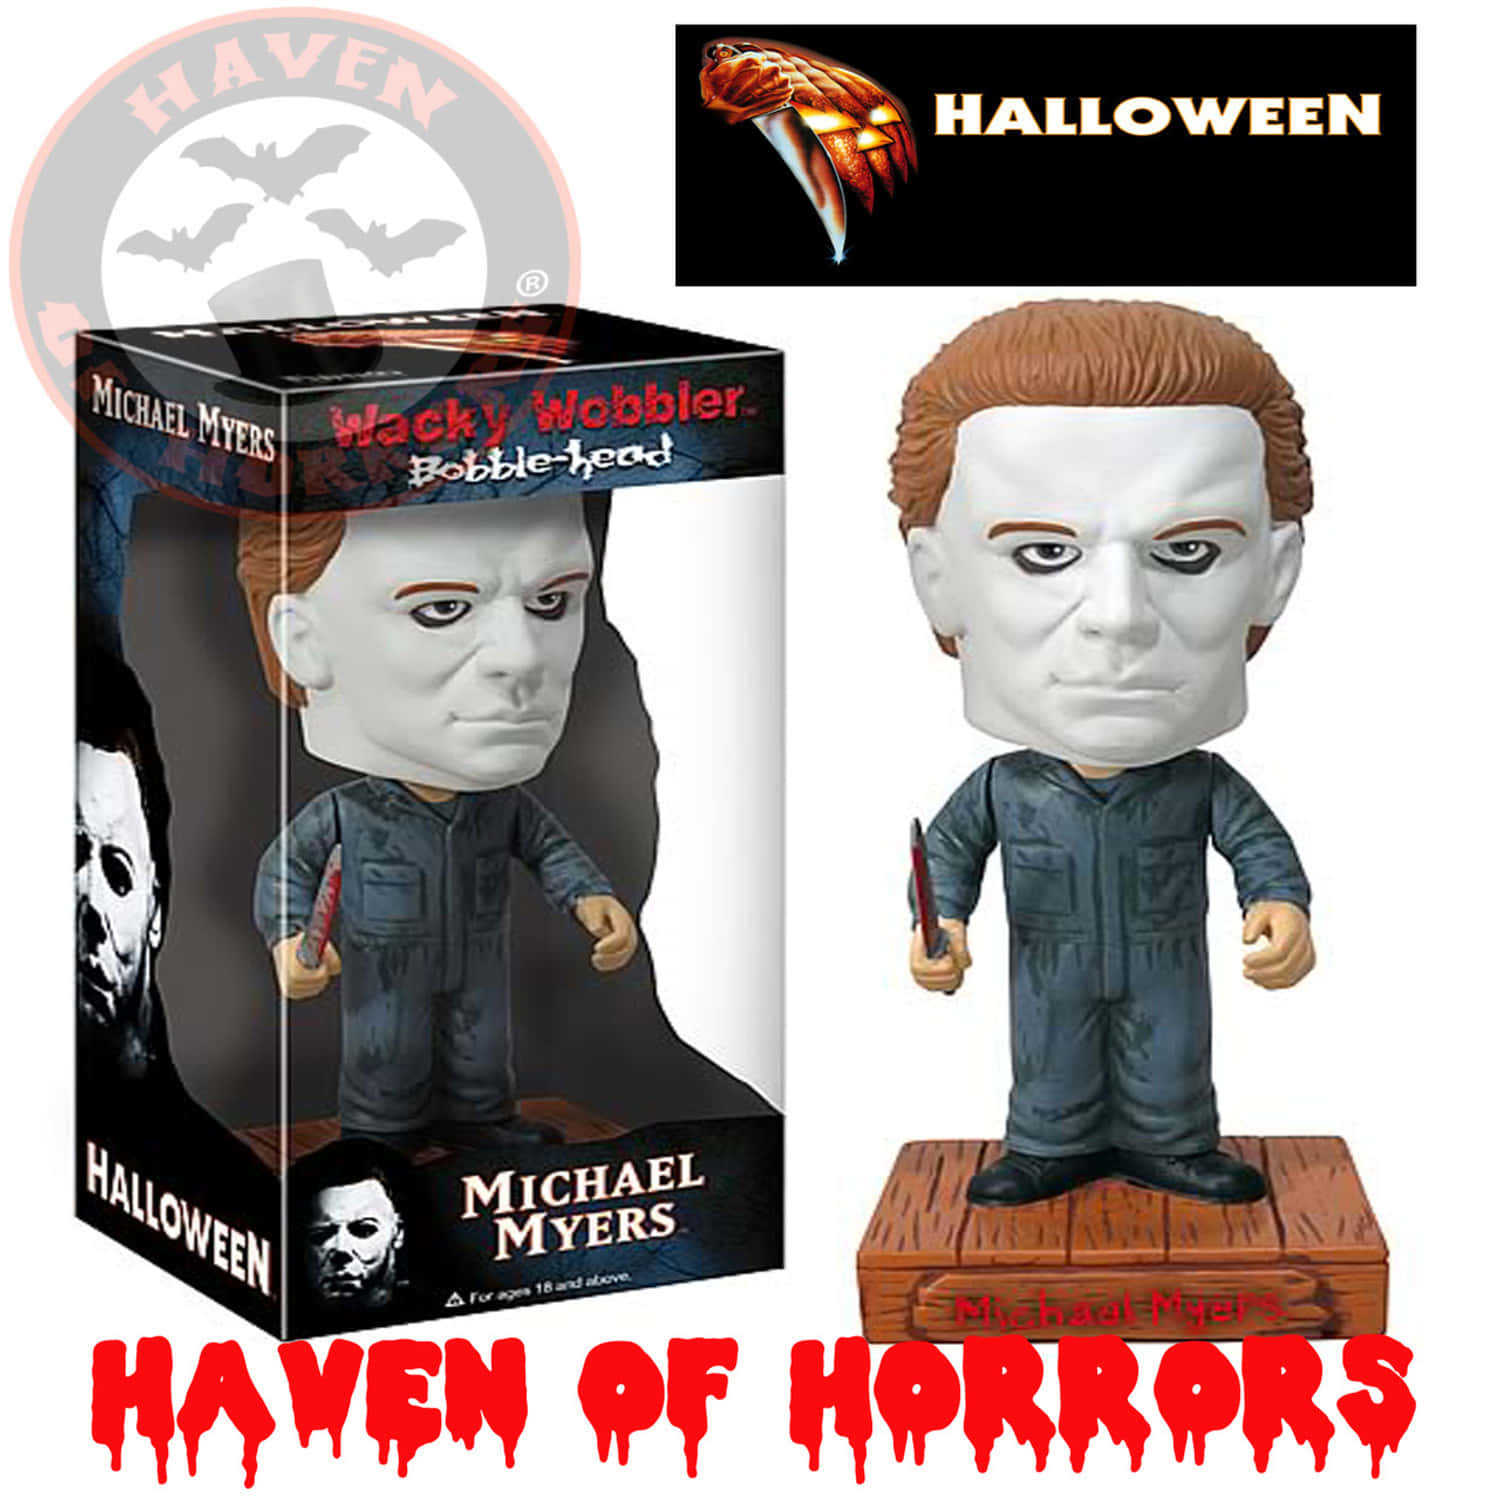 Prepare to be terrified by Michael Myers